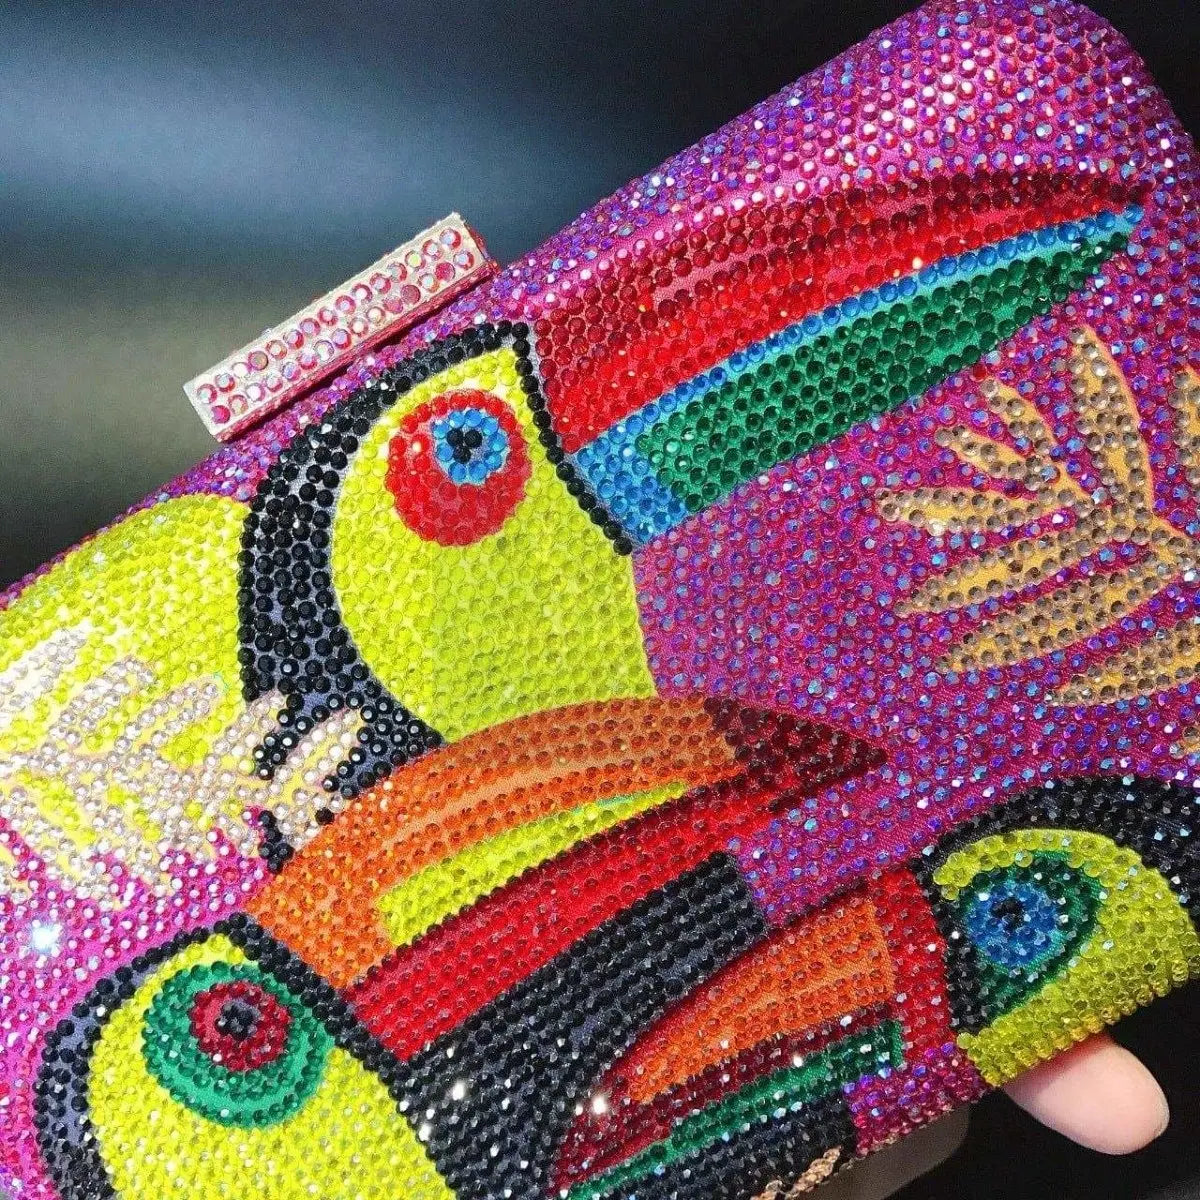 Toucan Bird Crystal Clutch - Uniquely You Online